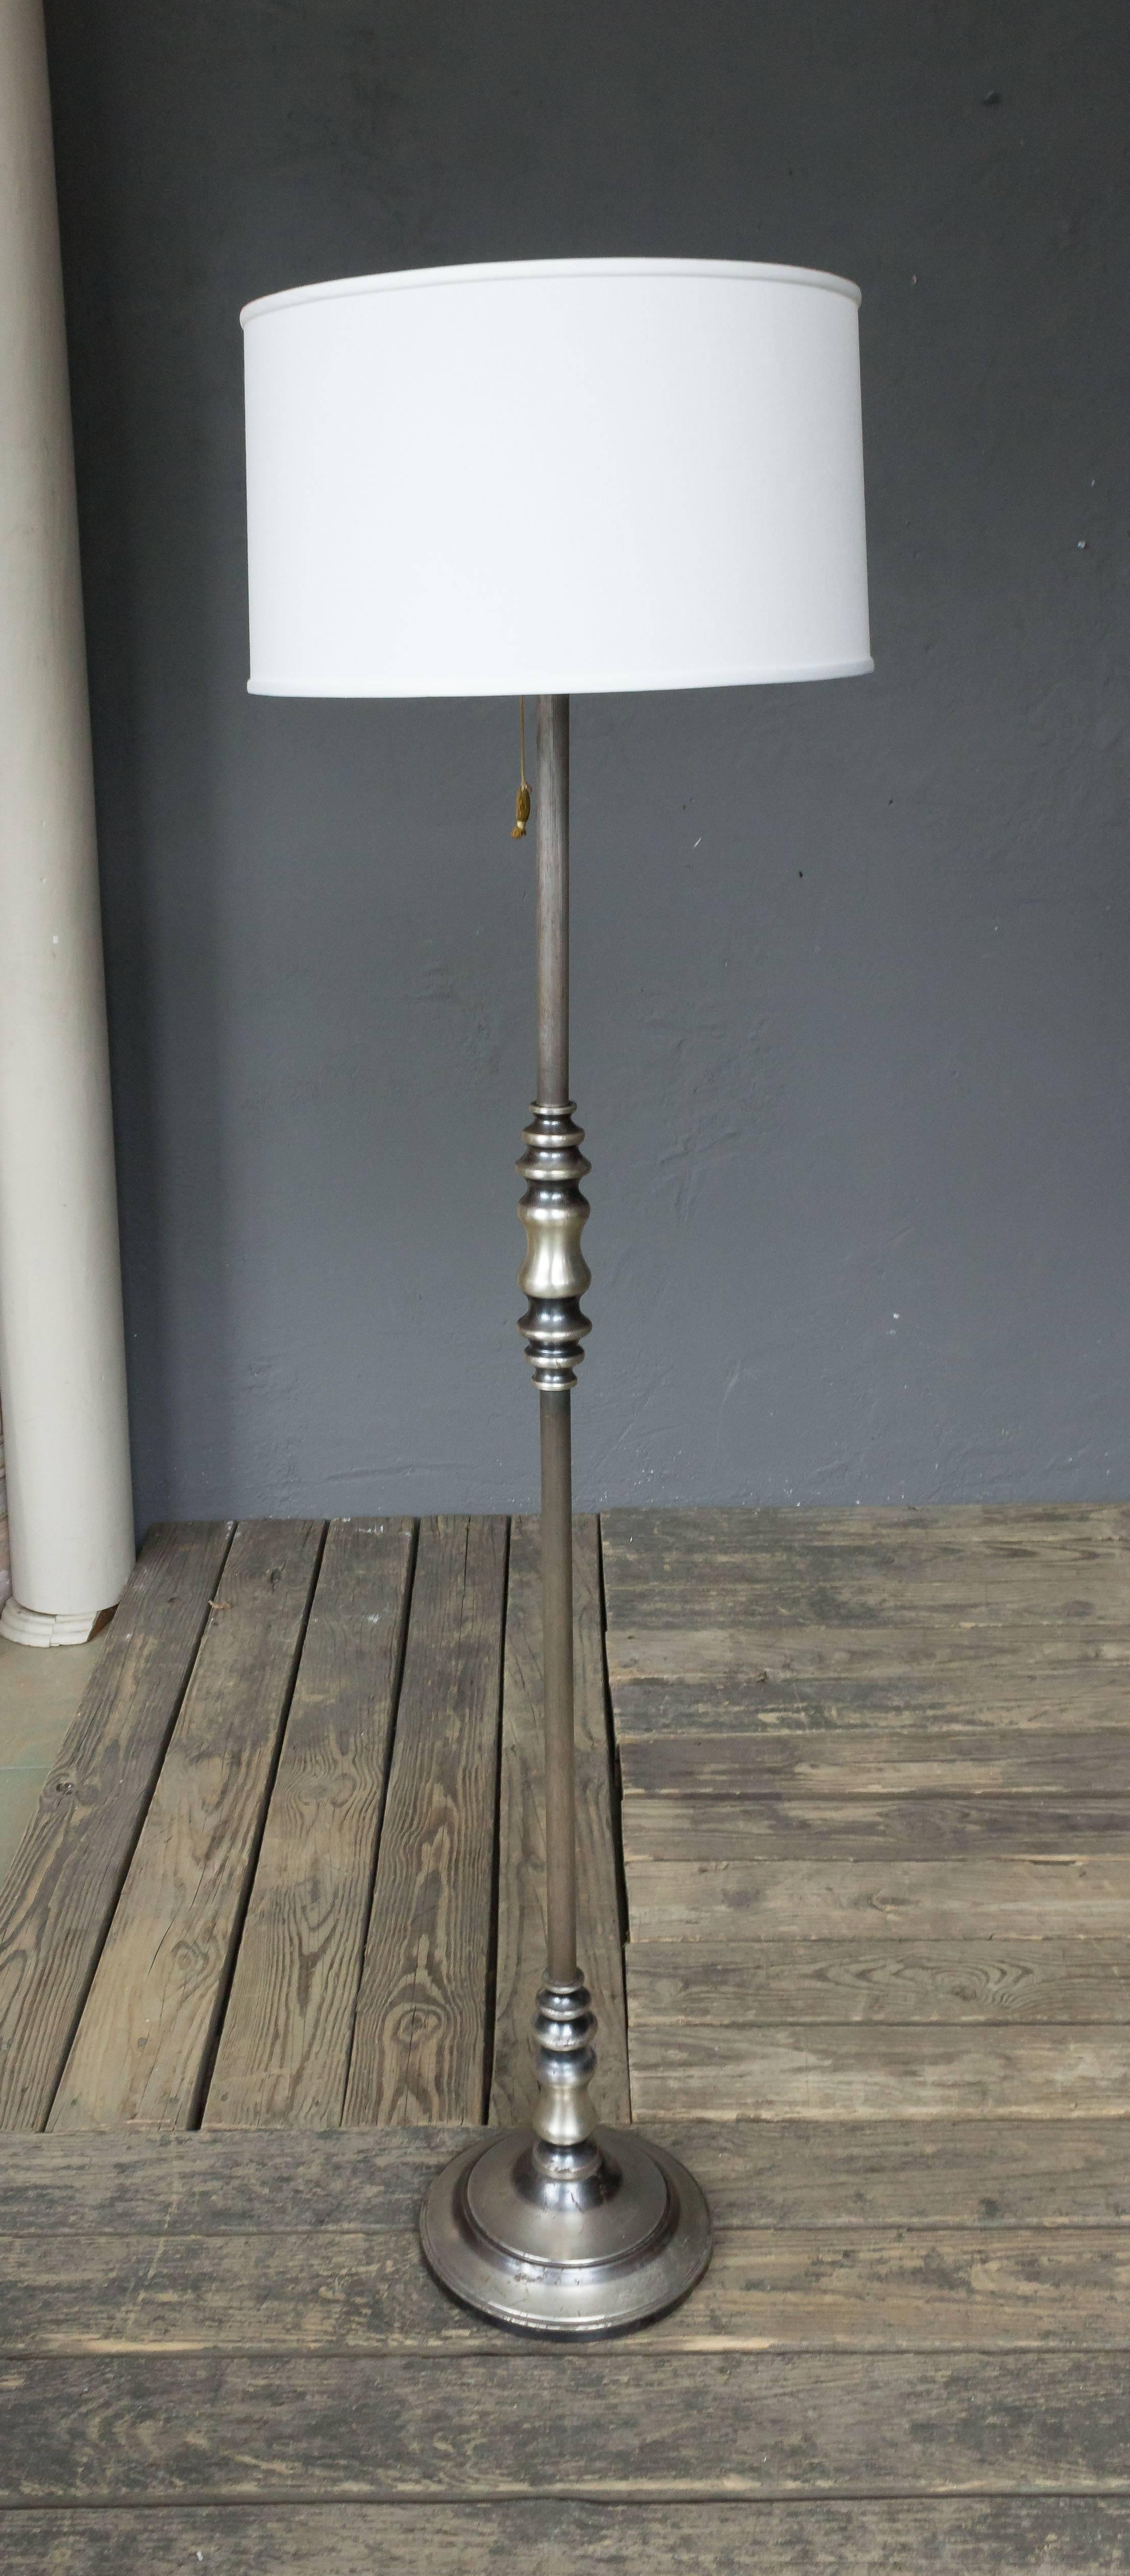 An interesting brass and metal floor lamp that has original silvered finish with darker patinated areas for contrast. French, 1950s.
Price includes hand polishing and new wiring. The plating is original and shows tarnishing and wear. The item is